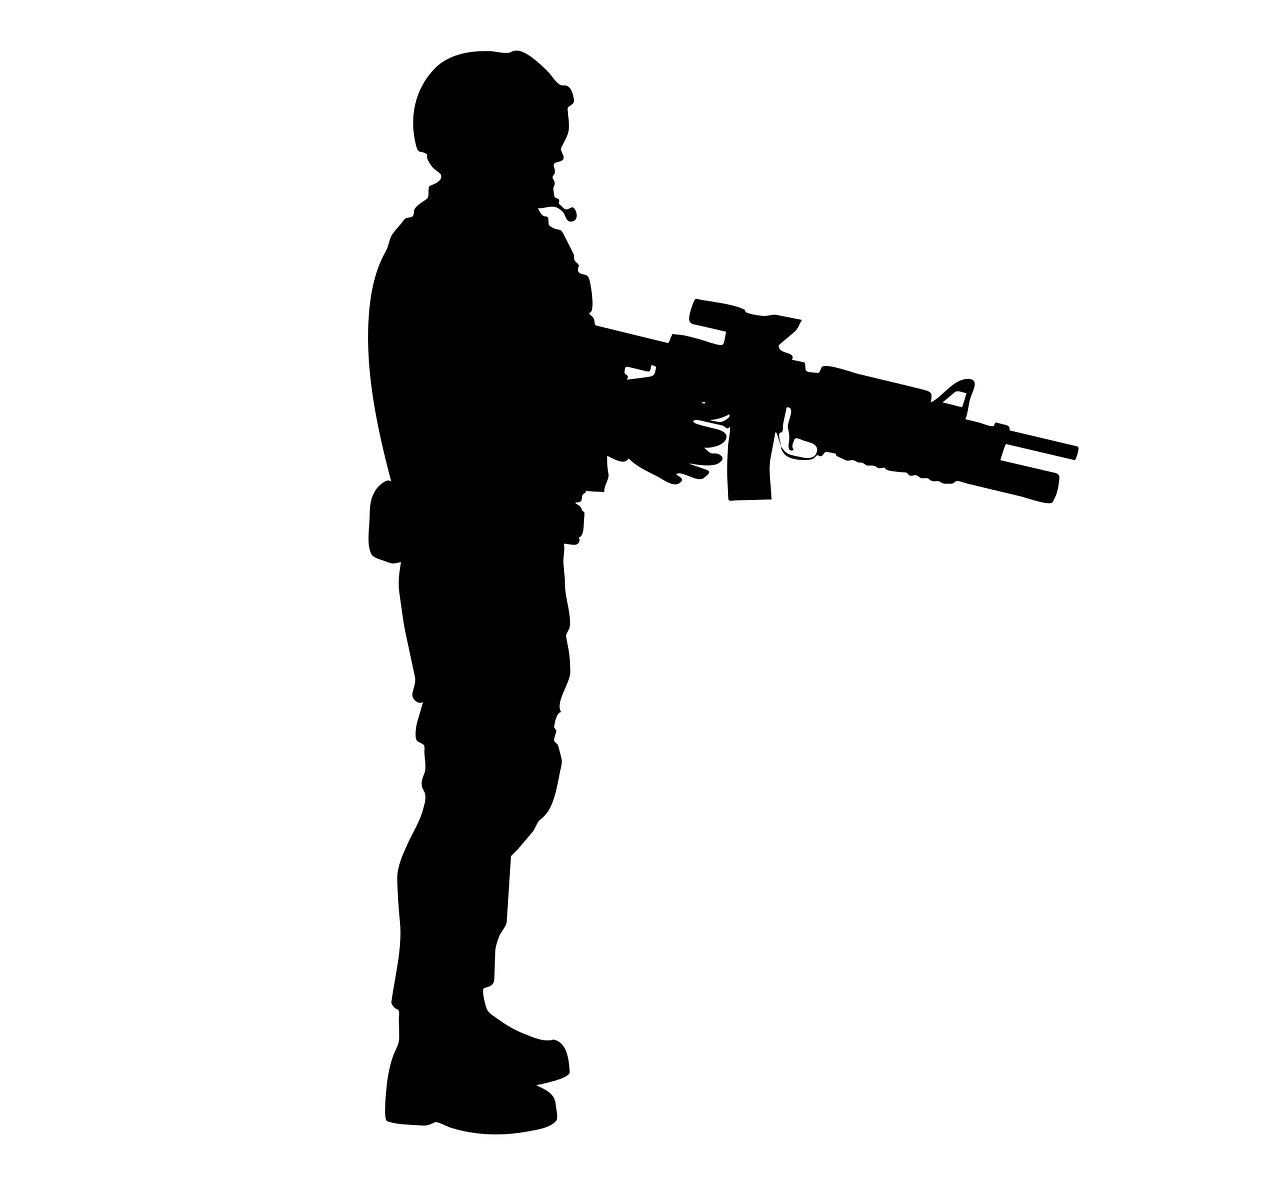 soldier-g5690f9ac5_1280.png